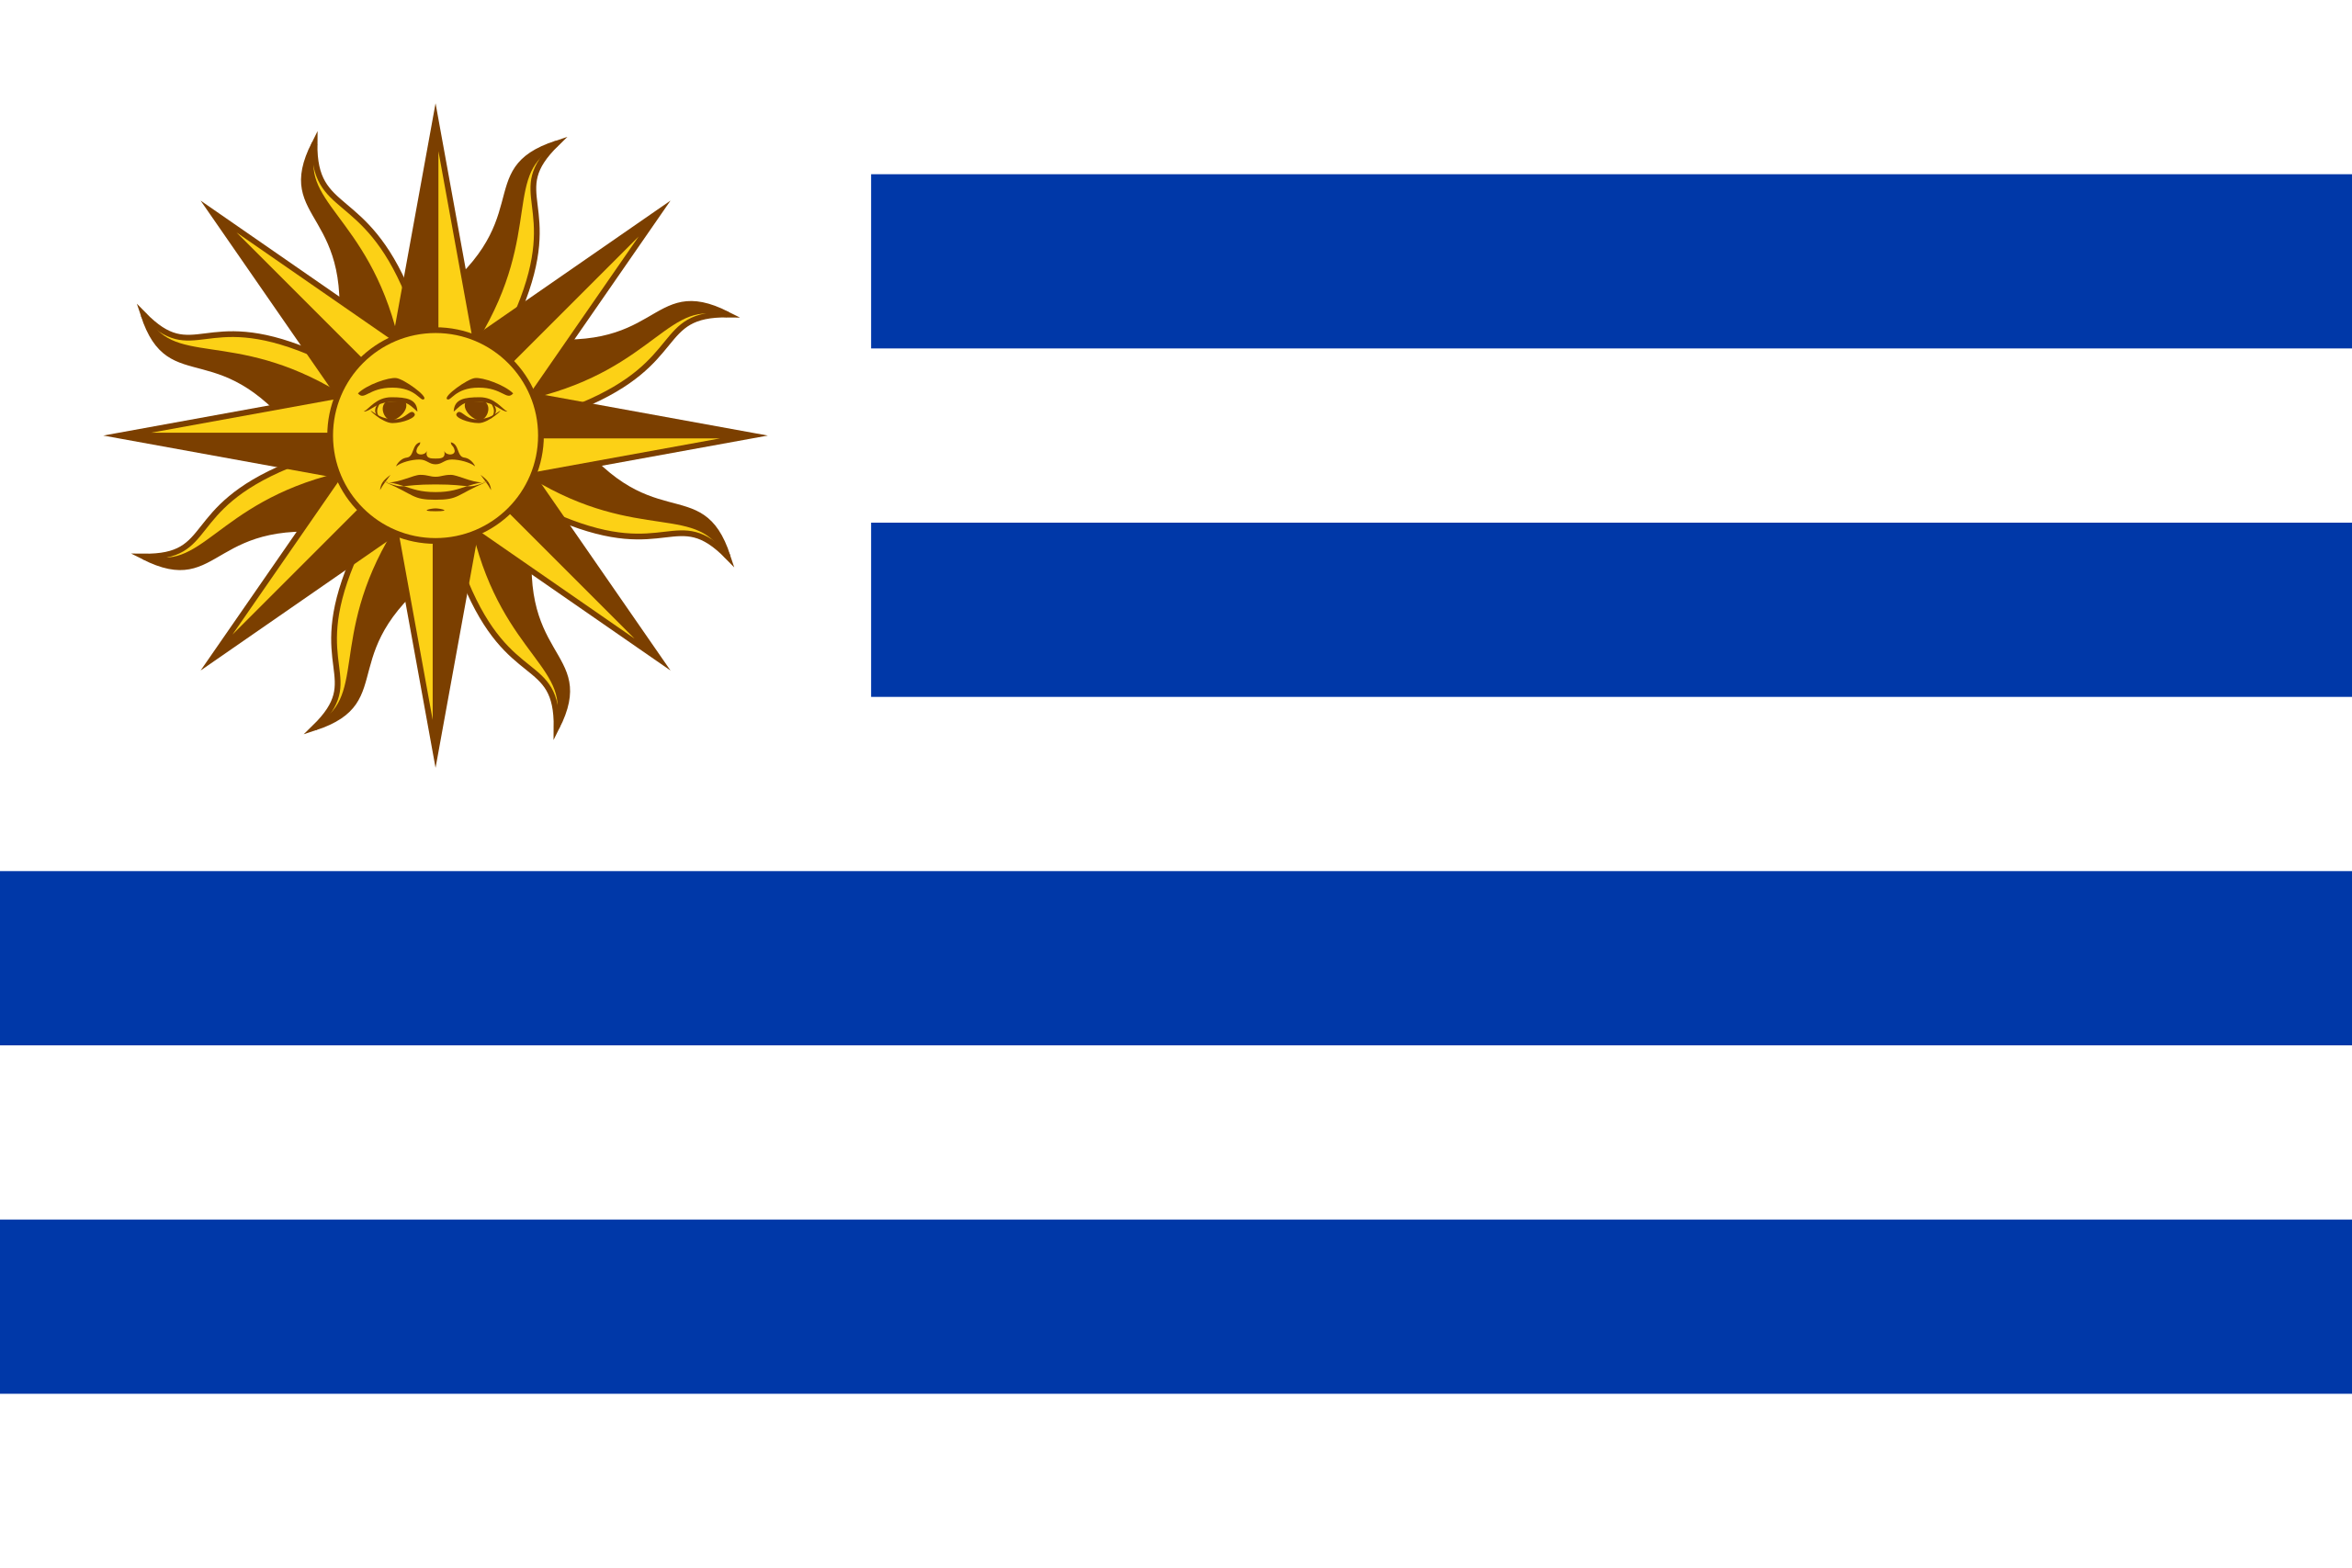 A white and blue-striped flag with a sun in the top left corner.